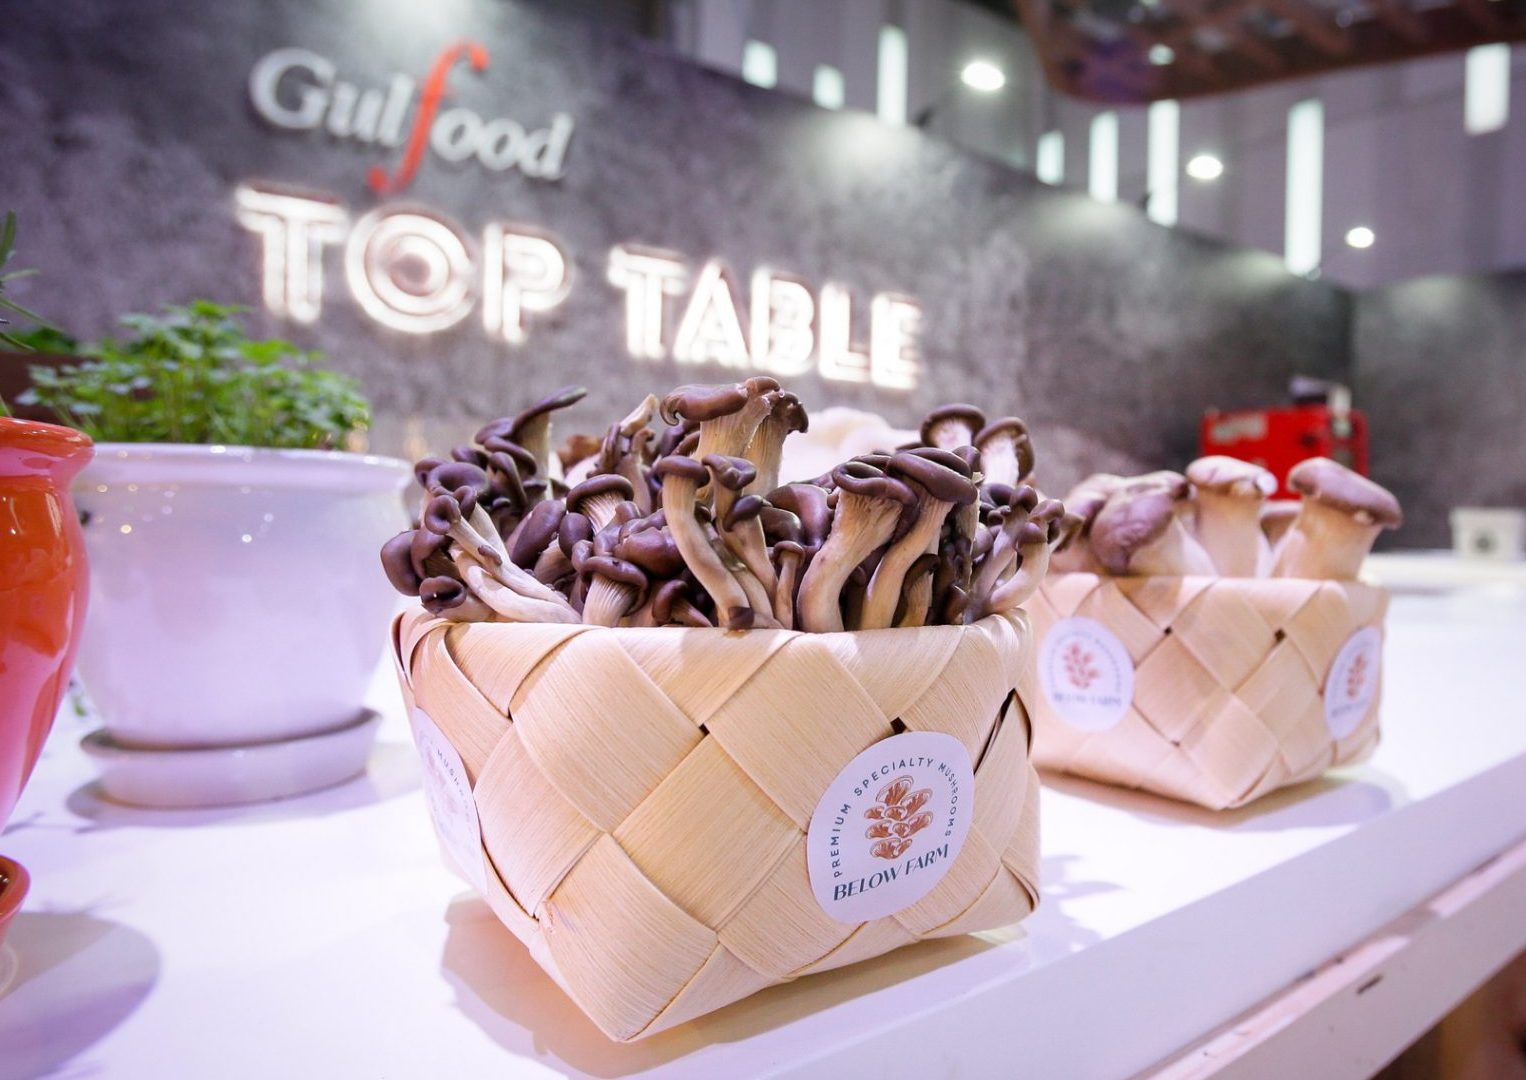 UAE’s F&B community launch innovative new products at Gulfood